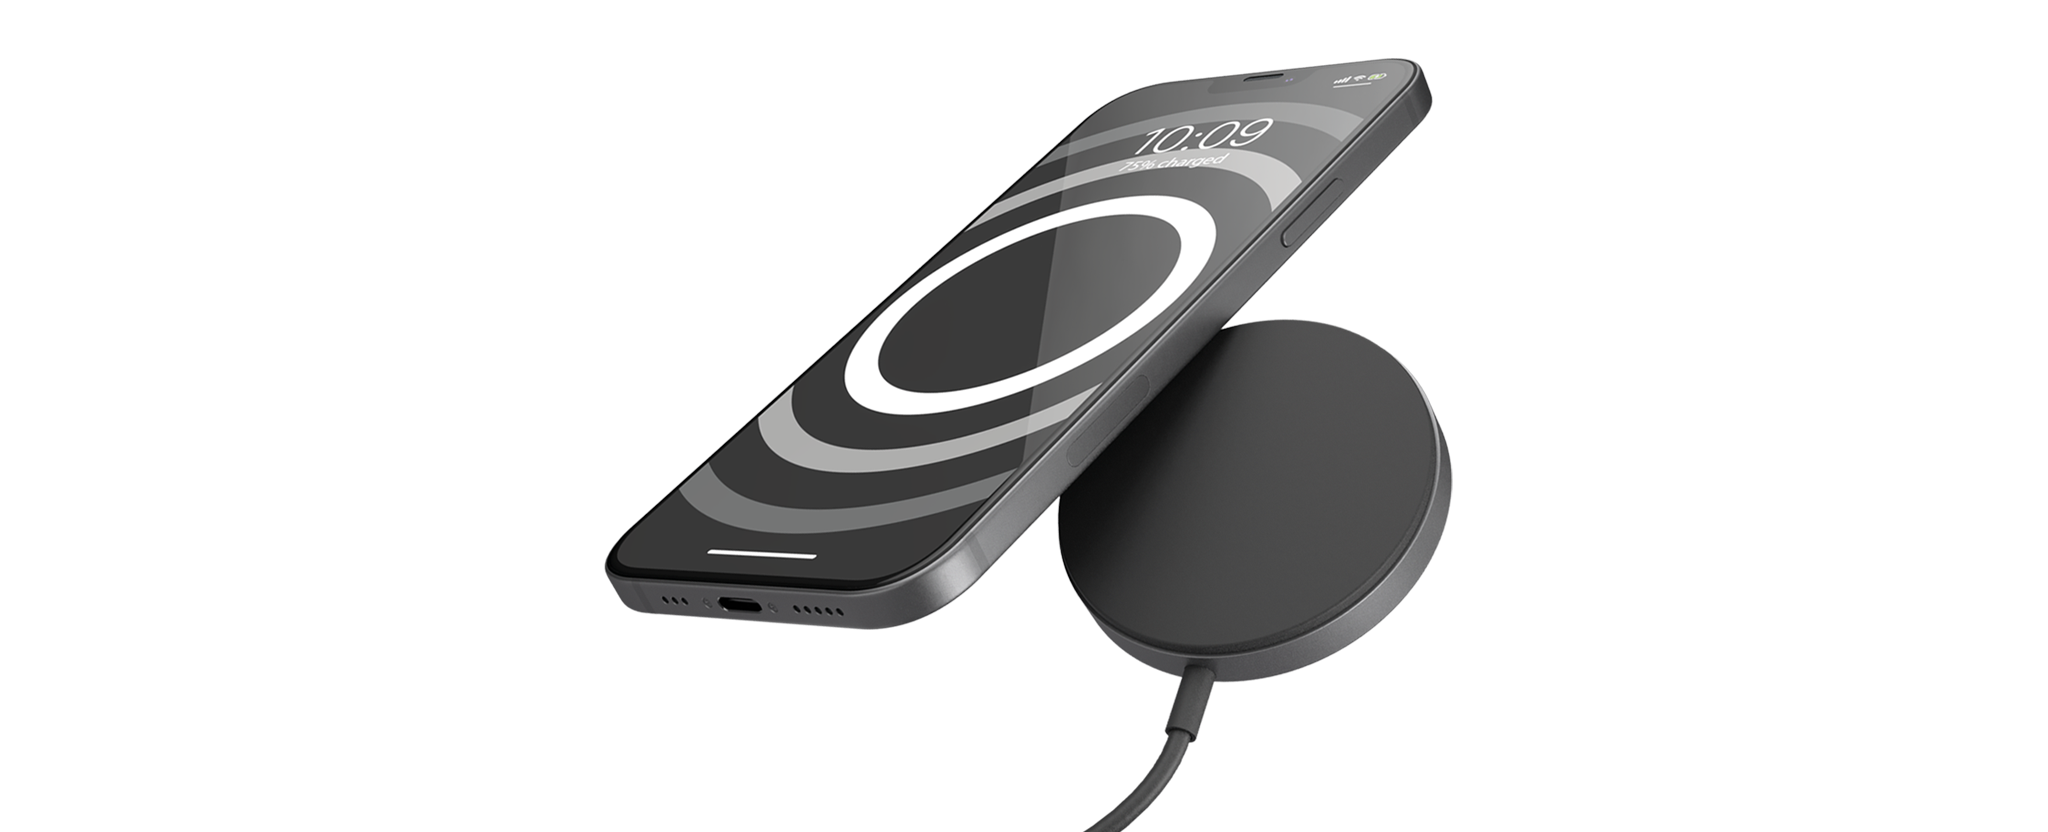 Qi2 wireless charger